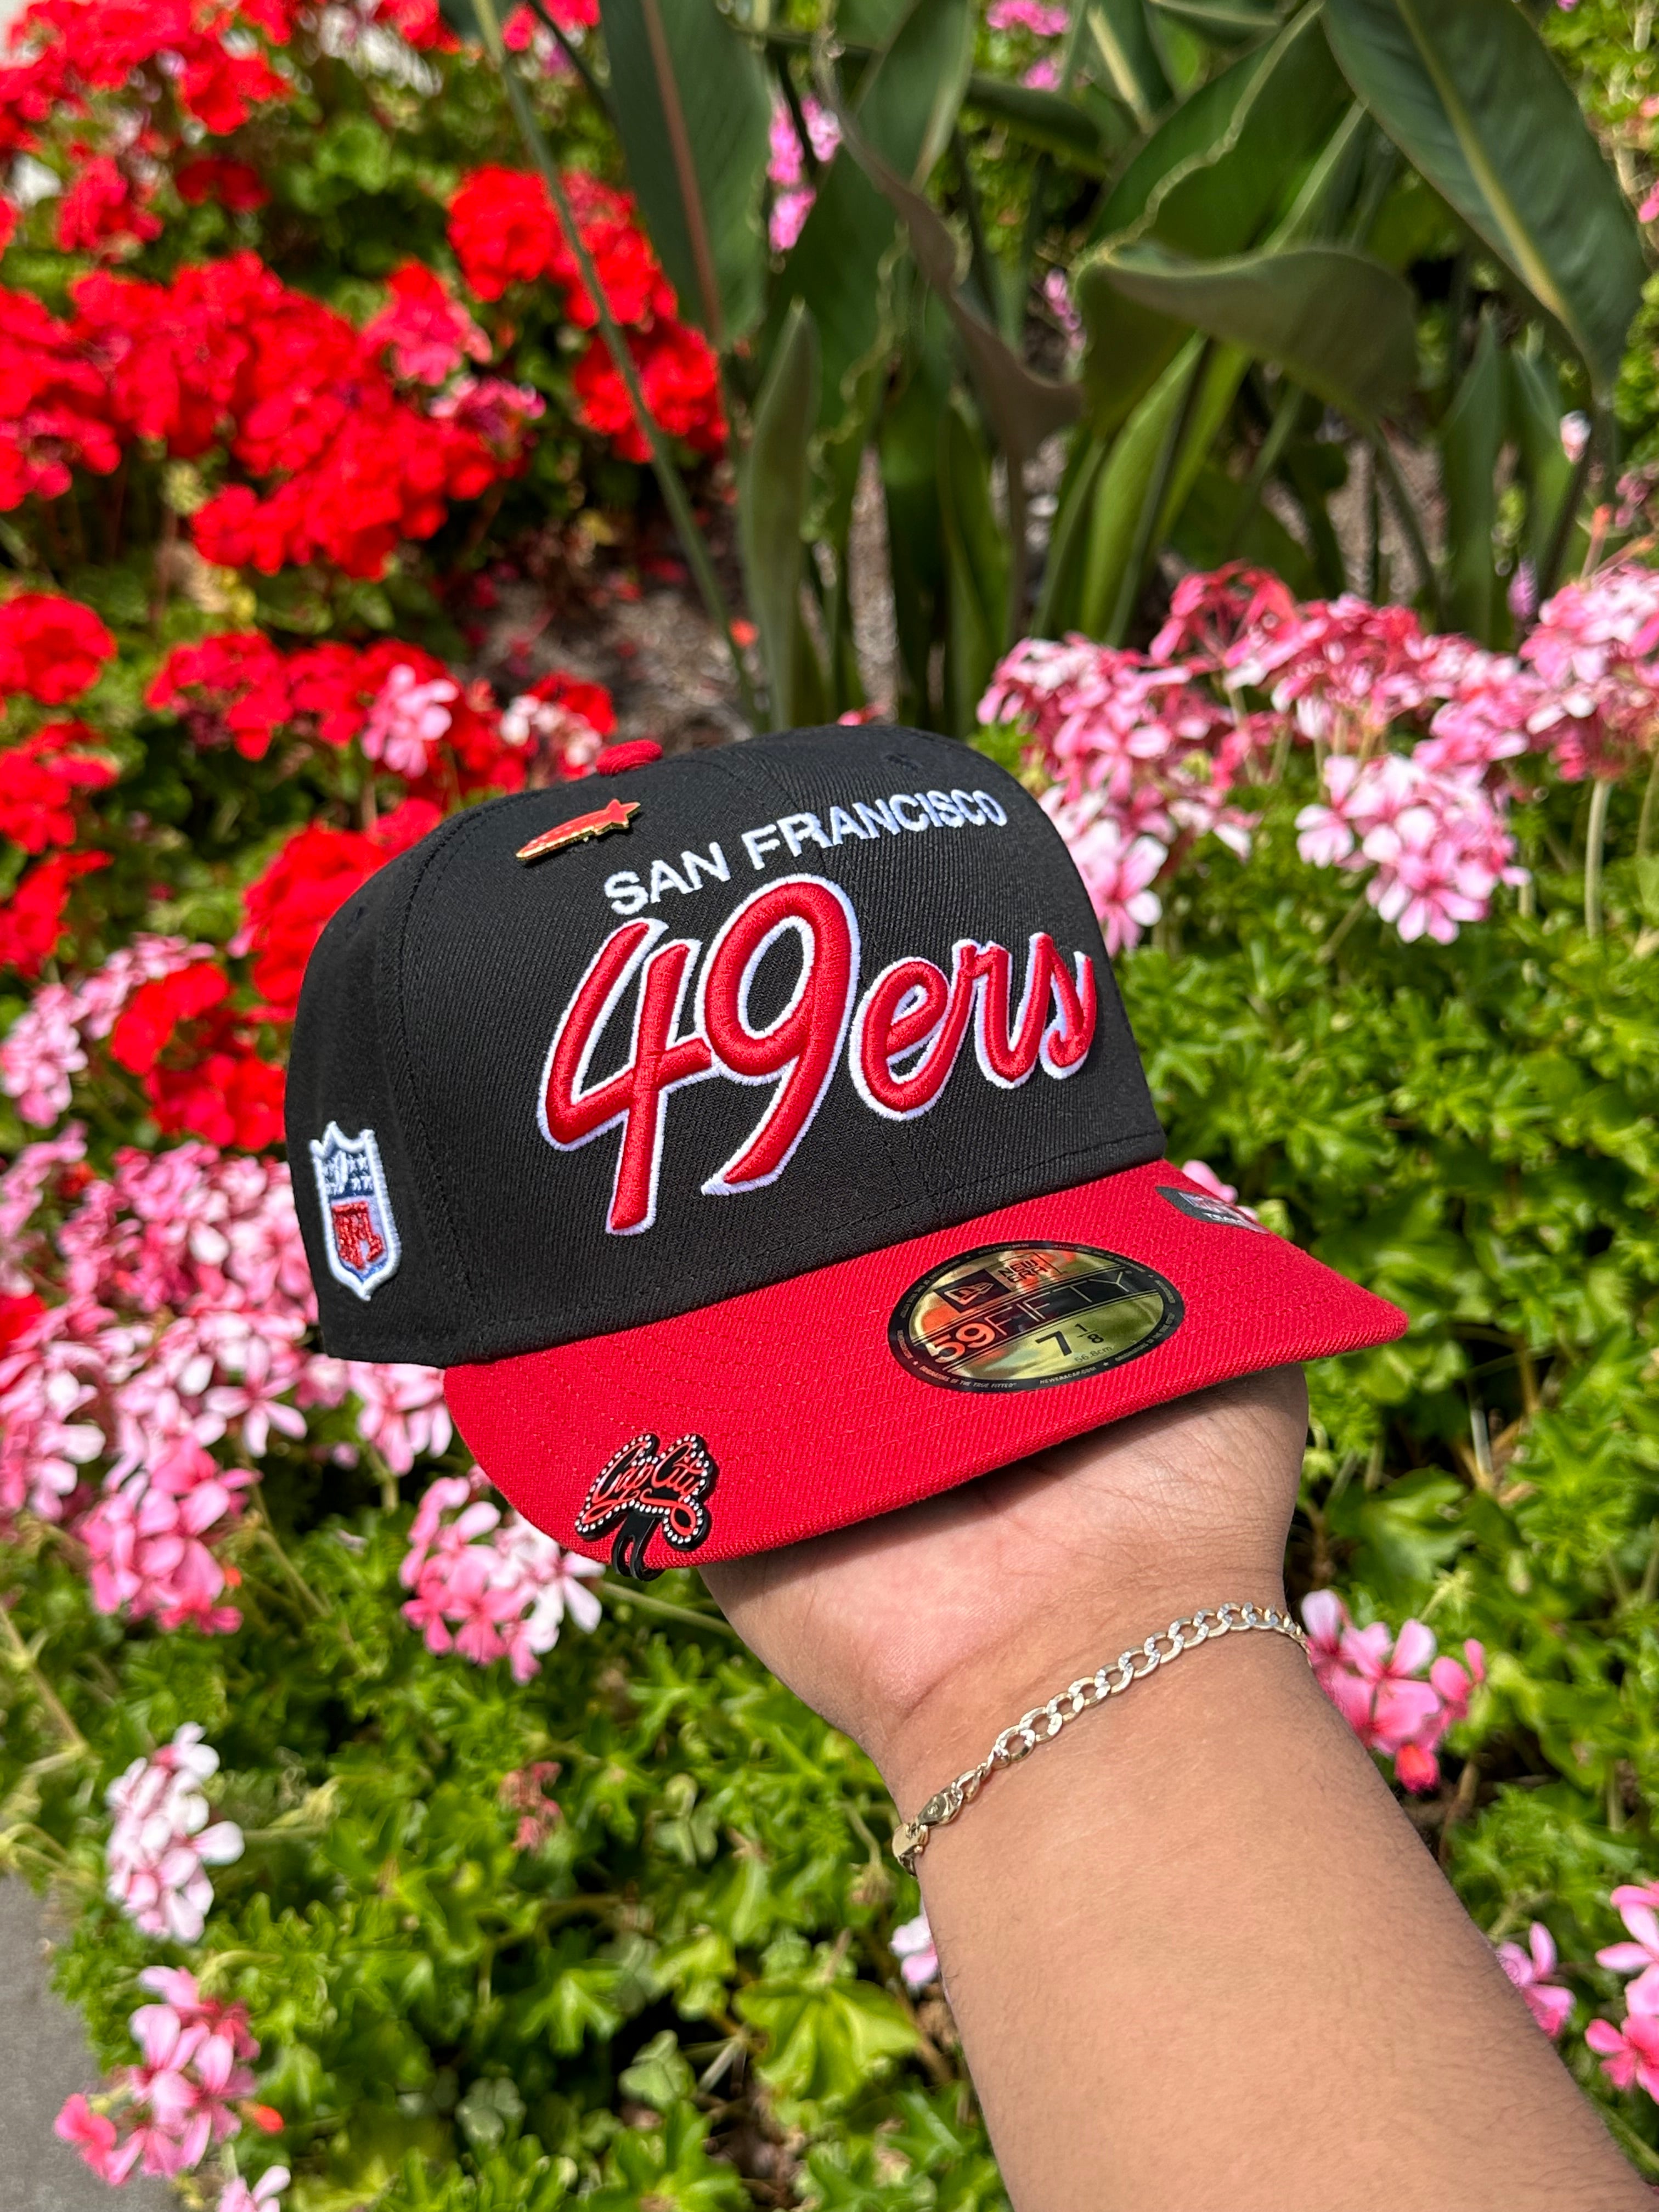 NEW ERA EXCLUSIVE 59FIFTY BLACK/RED SAN FRANSICO "49ERS" SCRIPT W/ NFL LOGO SIDE PATCH